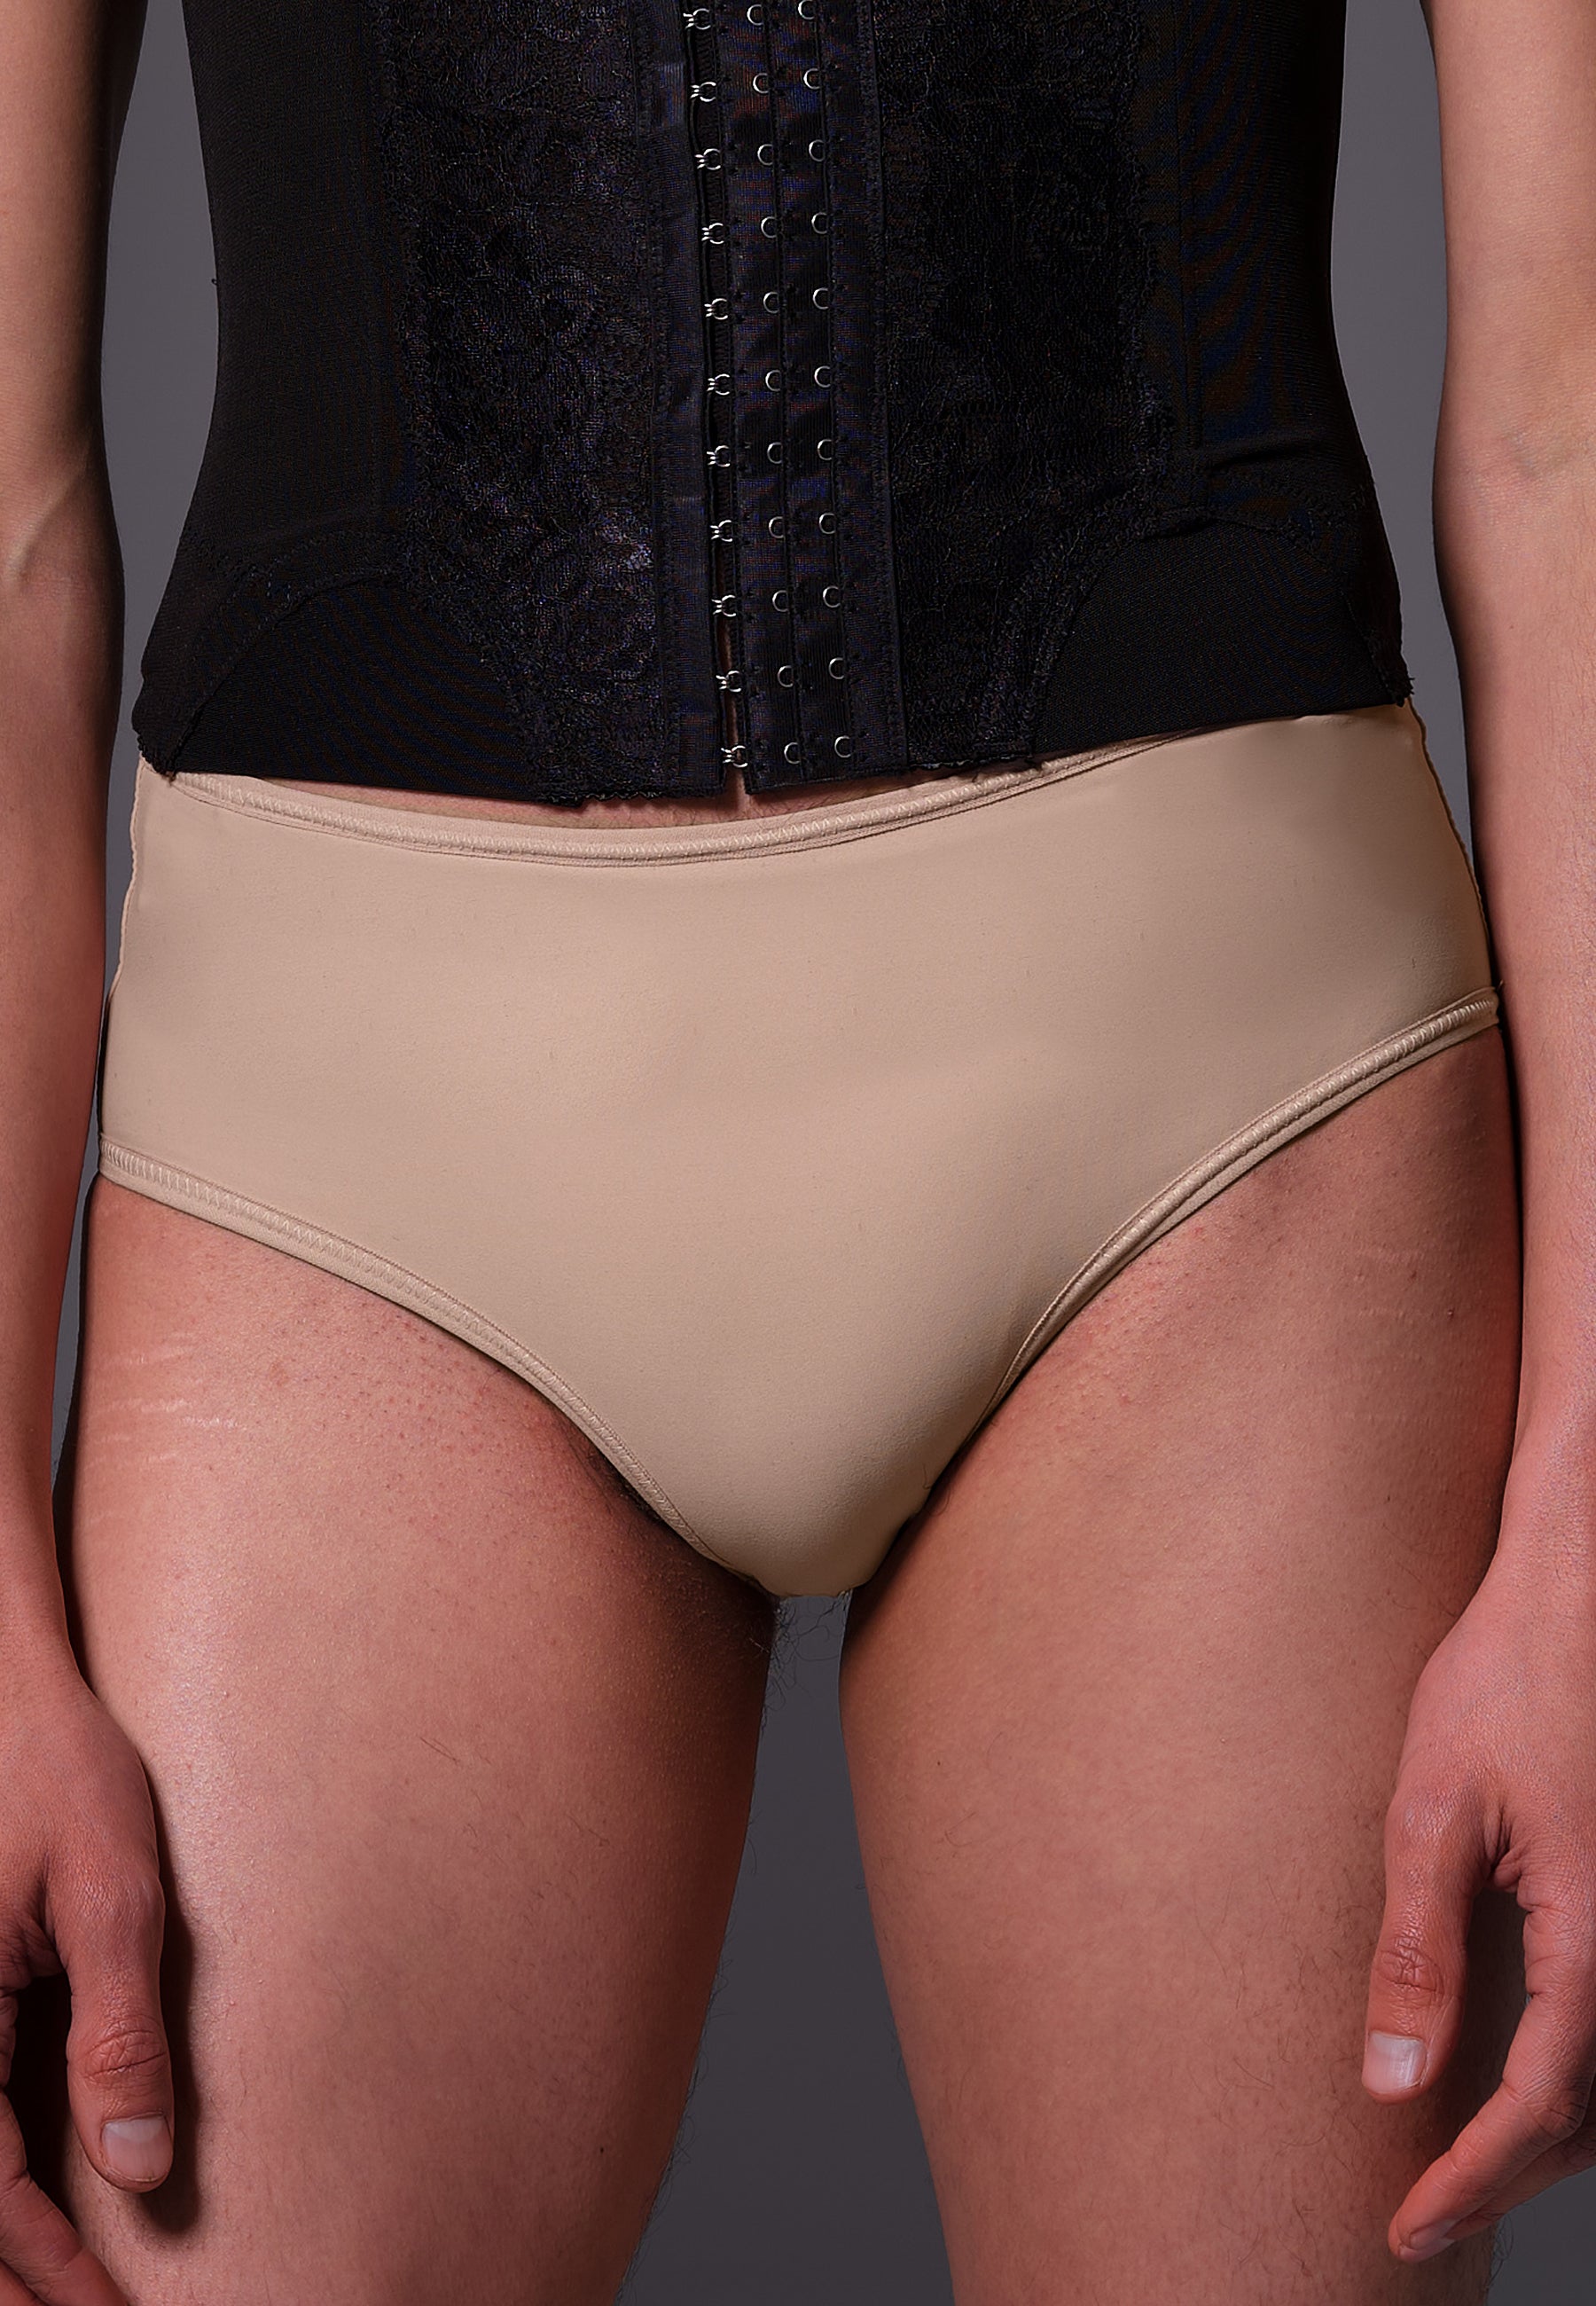 Tucking slip extra strong beige, UNTAG